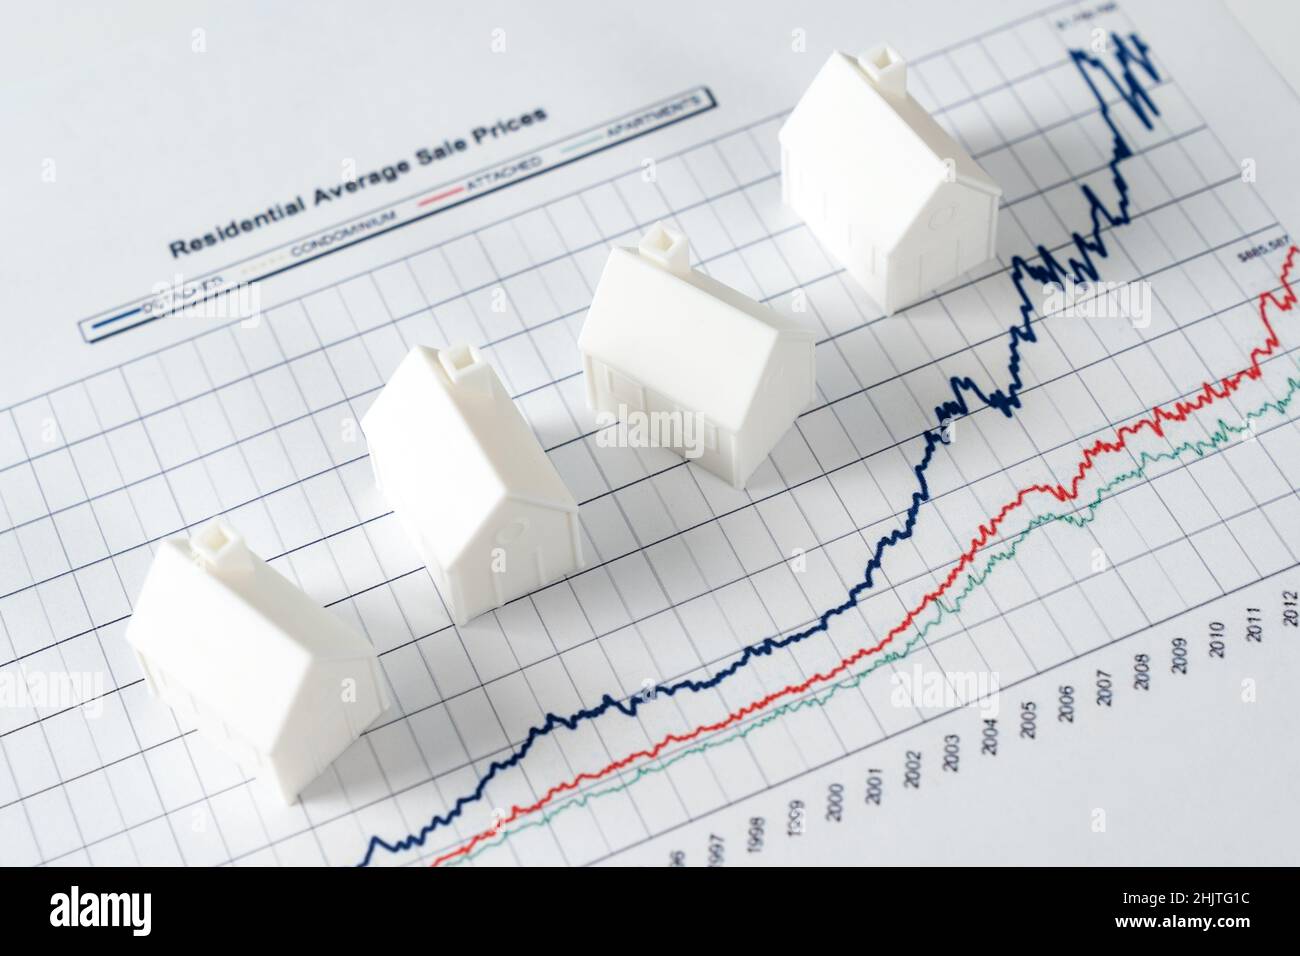 Growth in real estate price market Stock Photo